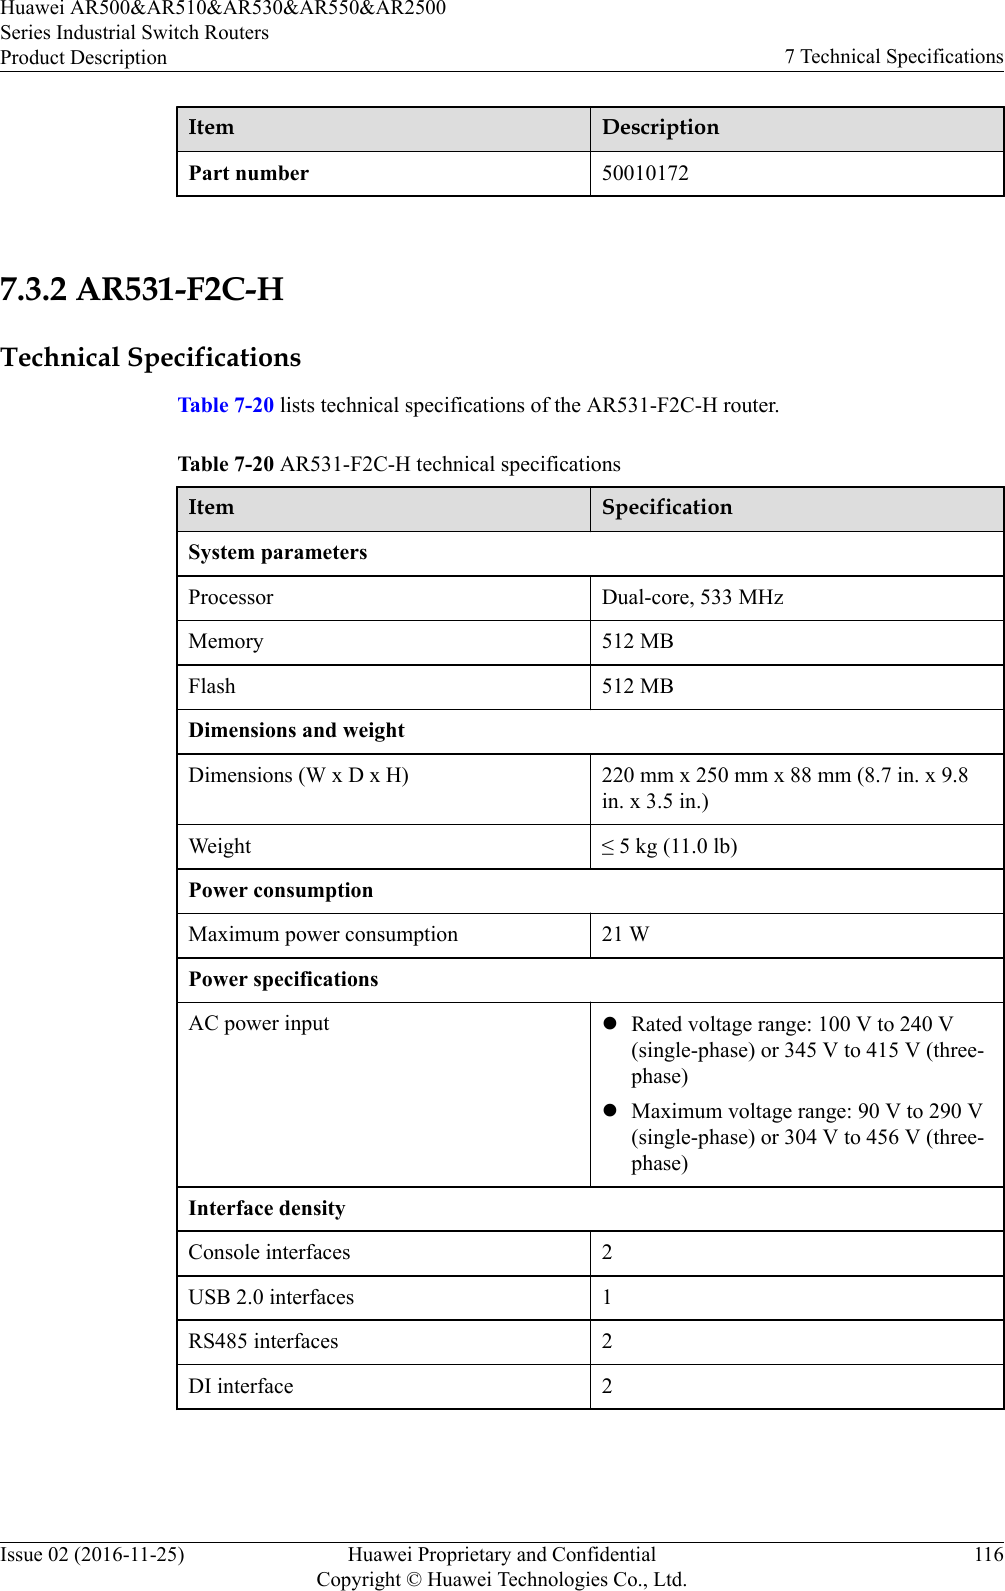 Item DescriptionPart number 50010172 7.3.2 AR531-F2C-HTechnical SpecificationsTable 7-20 lists technical specifications of the AR531-F2C-H router.Table 7-20 AR531-F2C-H technical specificationsItem SpecificationSystem parametersProcessor Dual-core, 533 MHzMemory 512 MBFlash 512 MBDimensions and weightDimensions (W x D x H) 220 mm x 250 mm x 88 mm (8.7 in. x 9.8in. x 3.5 in.)Weight ≤ 5 kg (11.0 lb)Power consumptionMaximum power consumption 21 WPower specificationsAC power input lRated voltage range: 100 V to 240 V(single-phase) or 345 V to 415 V (three-phase)lMaximum voltage range: 90 V to 290 V(single-phase) or 304 V to 456 V (three-phase)Interface densityConsole interfaces 2USB 2.0 interfaces 1RS485 interfaces 2DI interface 2Huawei AR500&amp;AR510&amp;AR530&amp;AR550&amp;AR2500Series Industrial Switch RoutersProduct Description 7 Technical SpecificationsIssue 02 (2016-11-25) Huawei Proprietary and ConfidentialCopyright © Huawei Technologies Co., Ltd.116